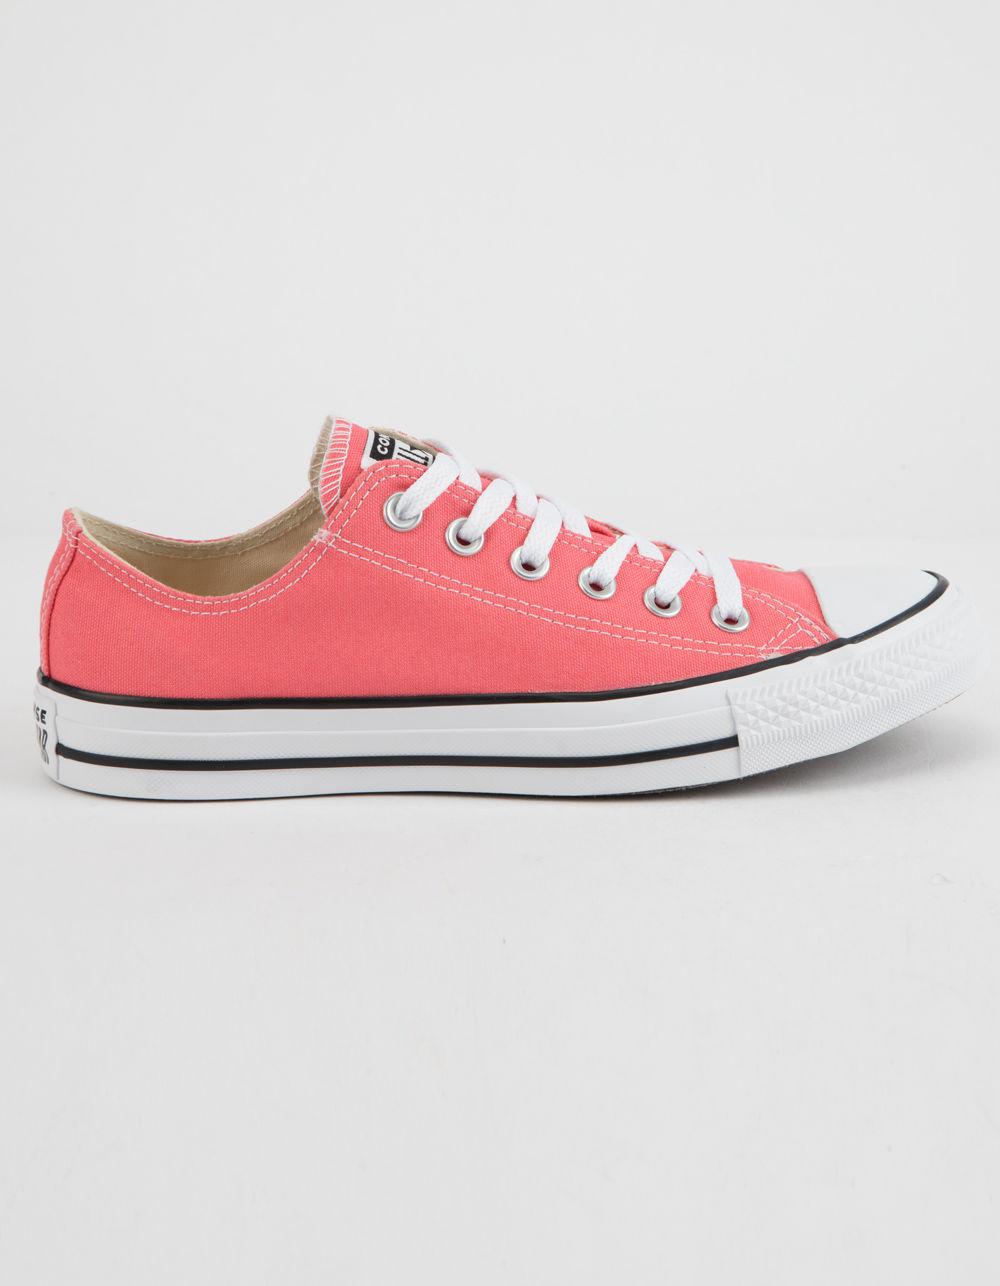 coral pink converse